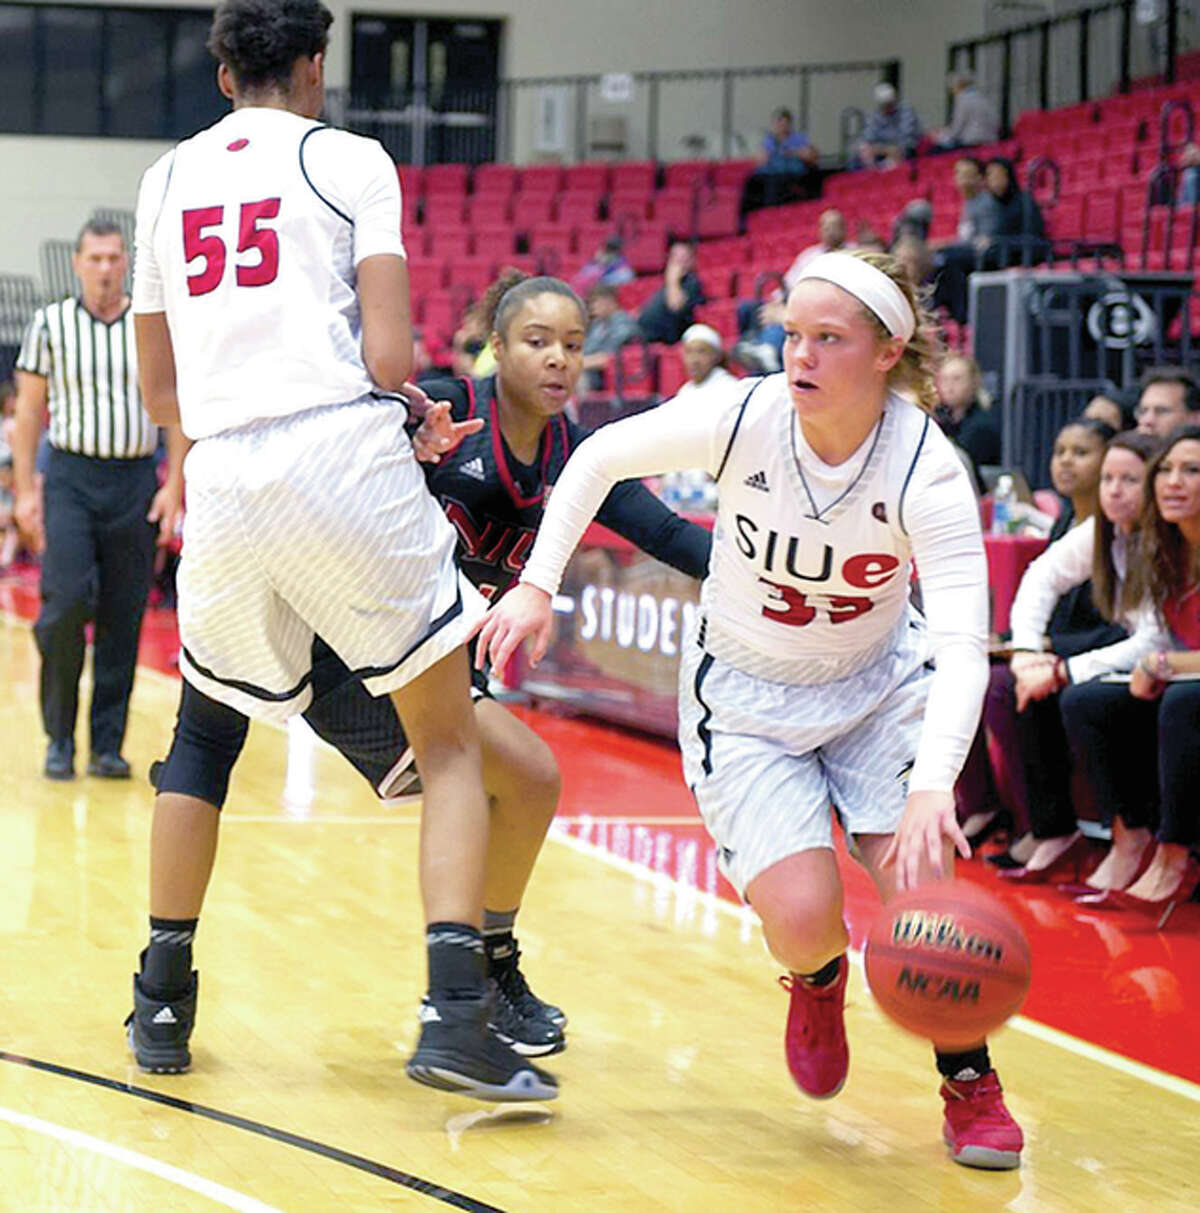 Sydney Smith, a 5-foot-8 sophomore from Carterville, scored 12 points for SIUE Monday in its 78-65 loss at Central Michigan.